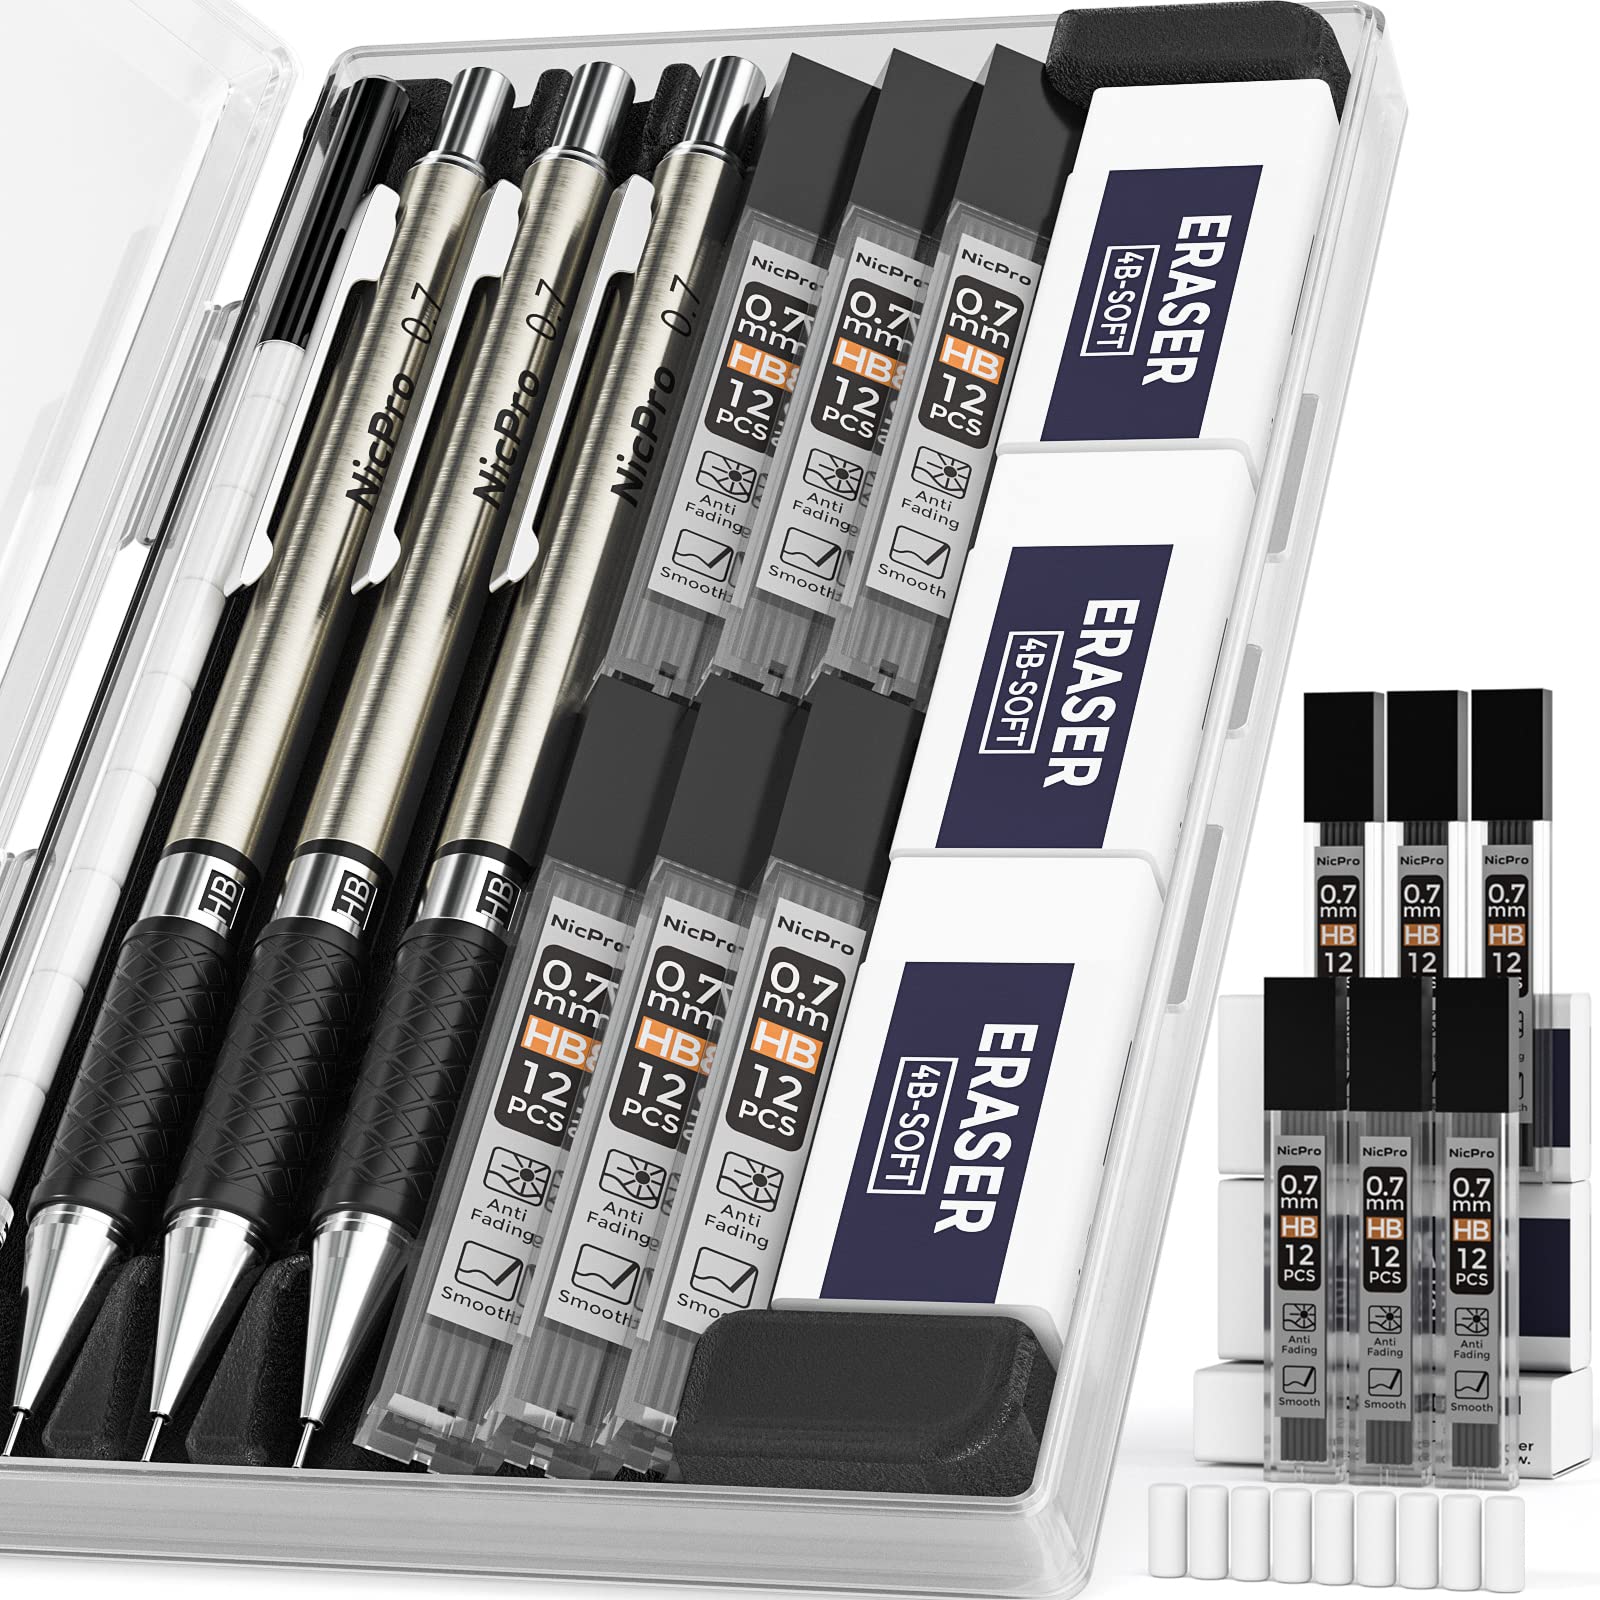 Nicpro 0.7 mm Art Mechanical Pencils Set in Storage Case, 3 PCS Metal Drafting Pencil Lead Pencil with 6 Tube HB Lead Refills, 3 Erasers, 9 PCS Eraser Refills for Artist Writing, Drawing, Sketching